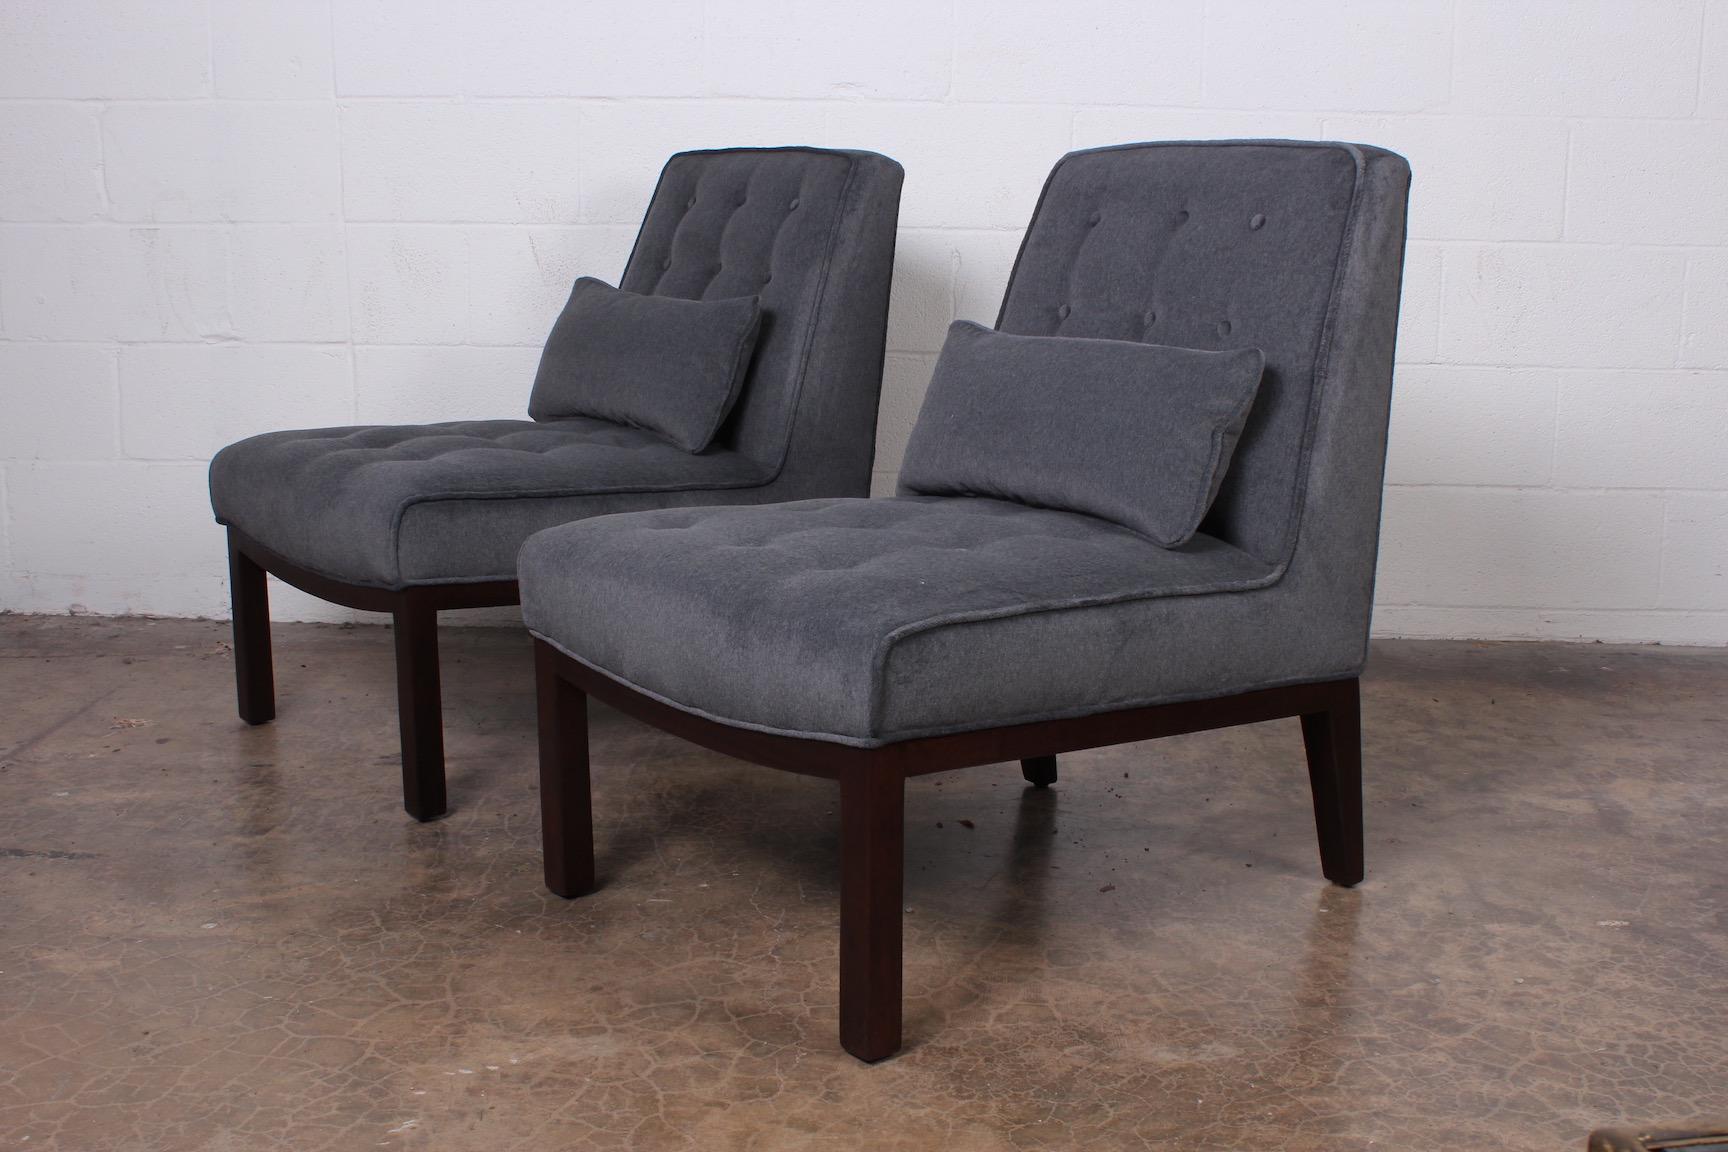 Pair of Slipper Chairs by Edward Wormley for Dunbar 3